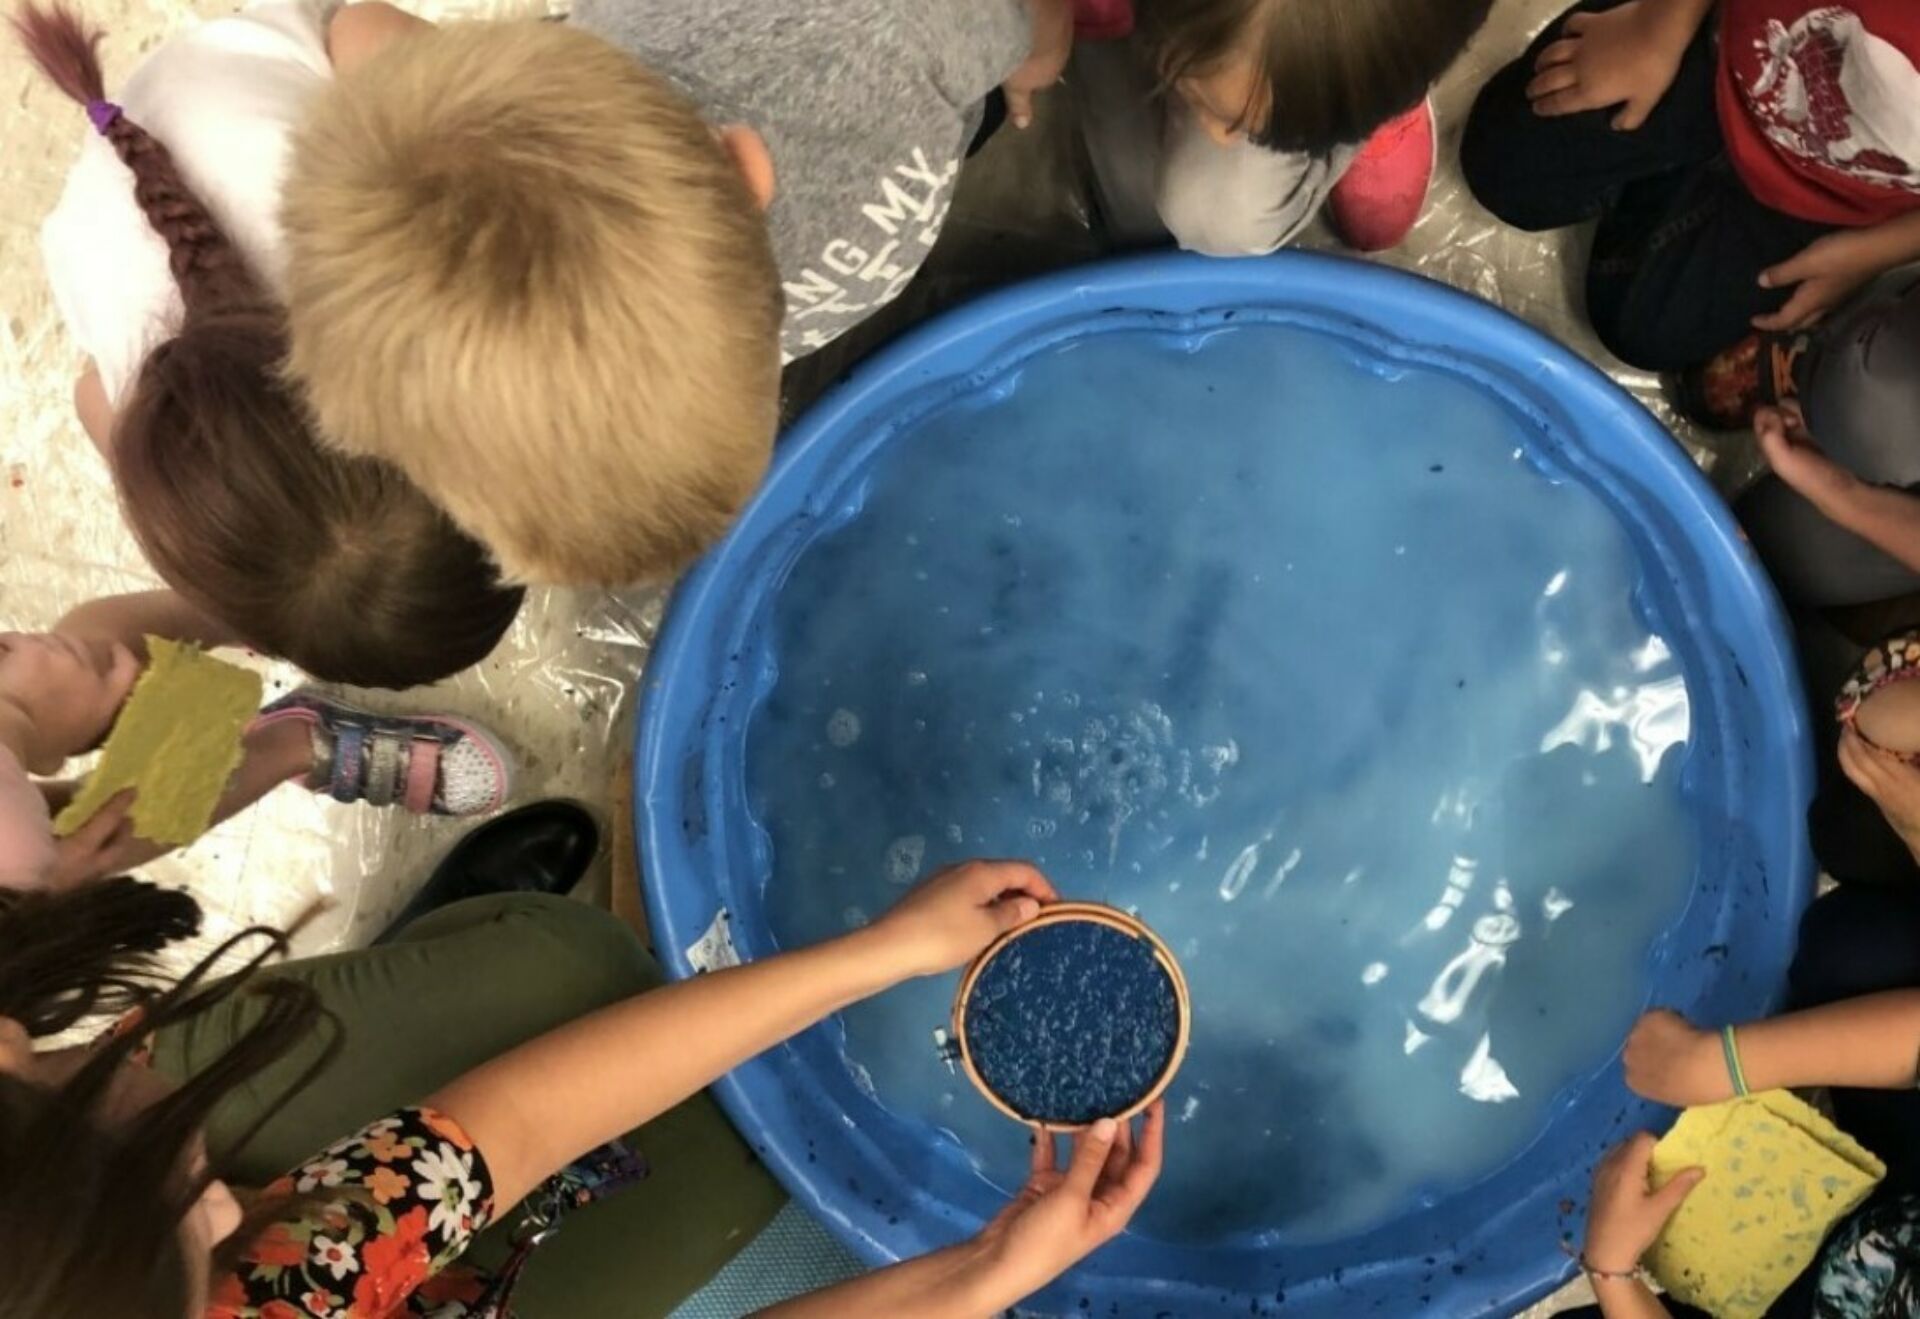 Overhead view of a group of children surrounding a bright blue tub filled with liquid; one student has arms outstretched, holding a copper bowl of what appears to be intense blue dye.